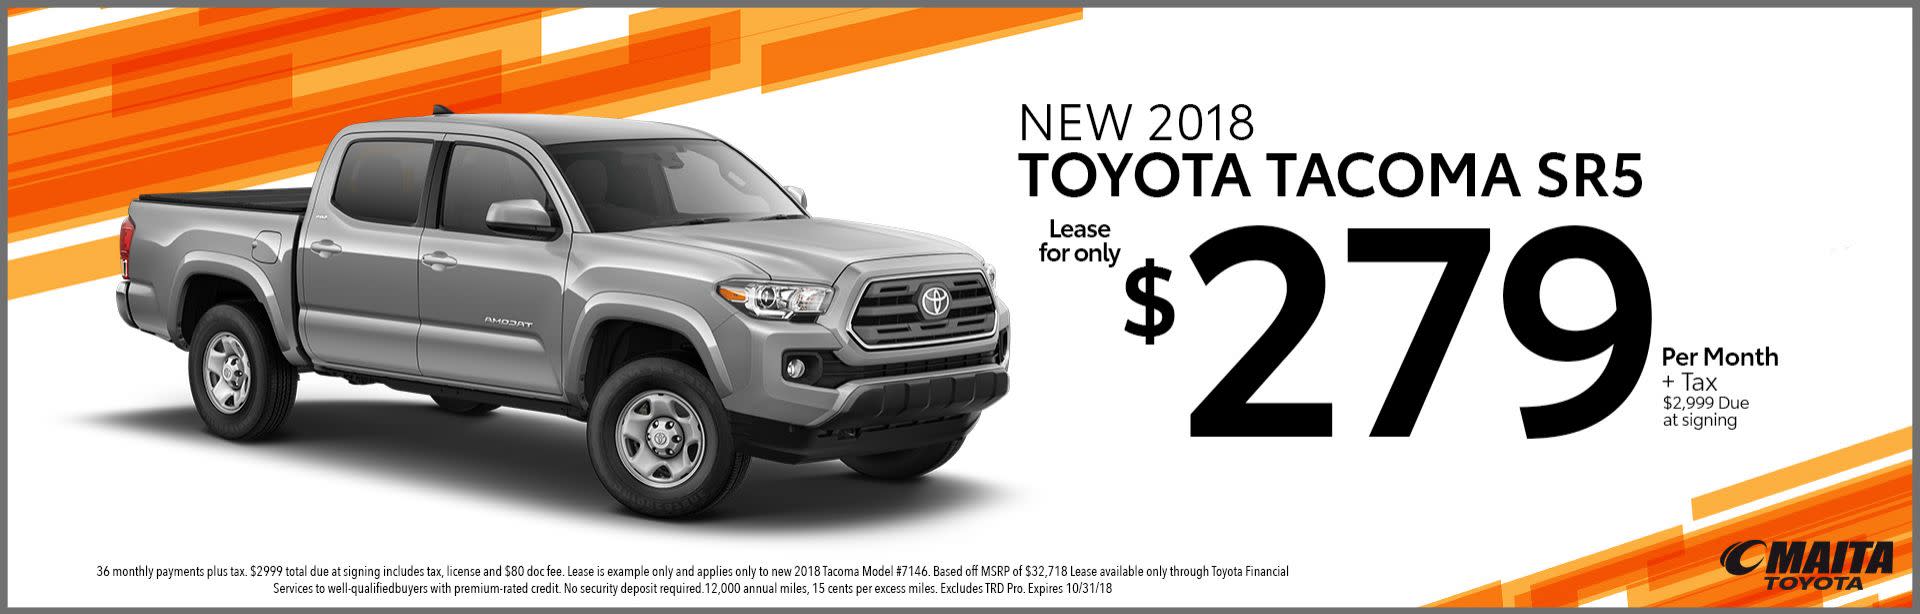 Feel Free To Browse Our Cur Inventory Below If You Have Any Questions About Lease Or Purchase Of A New Toyota Fill Out Easy Online